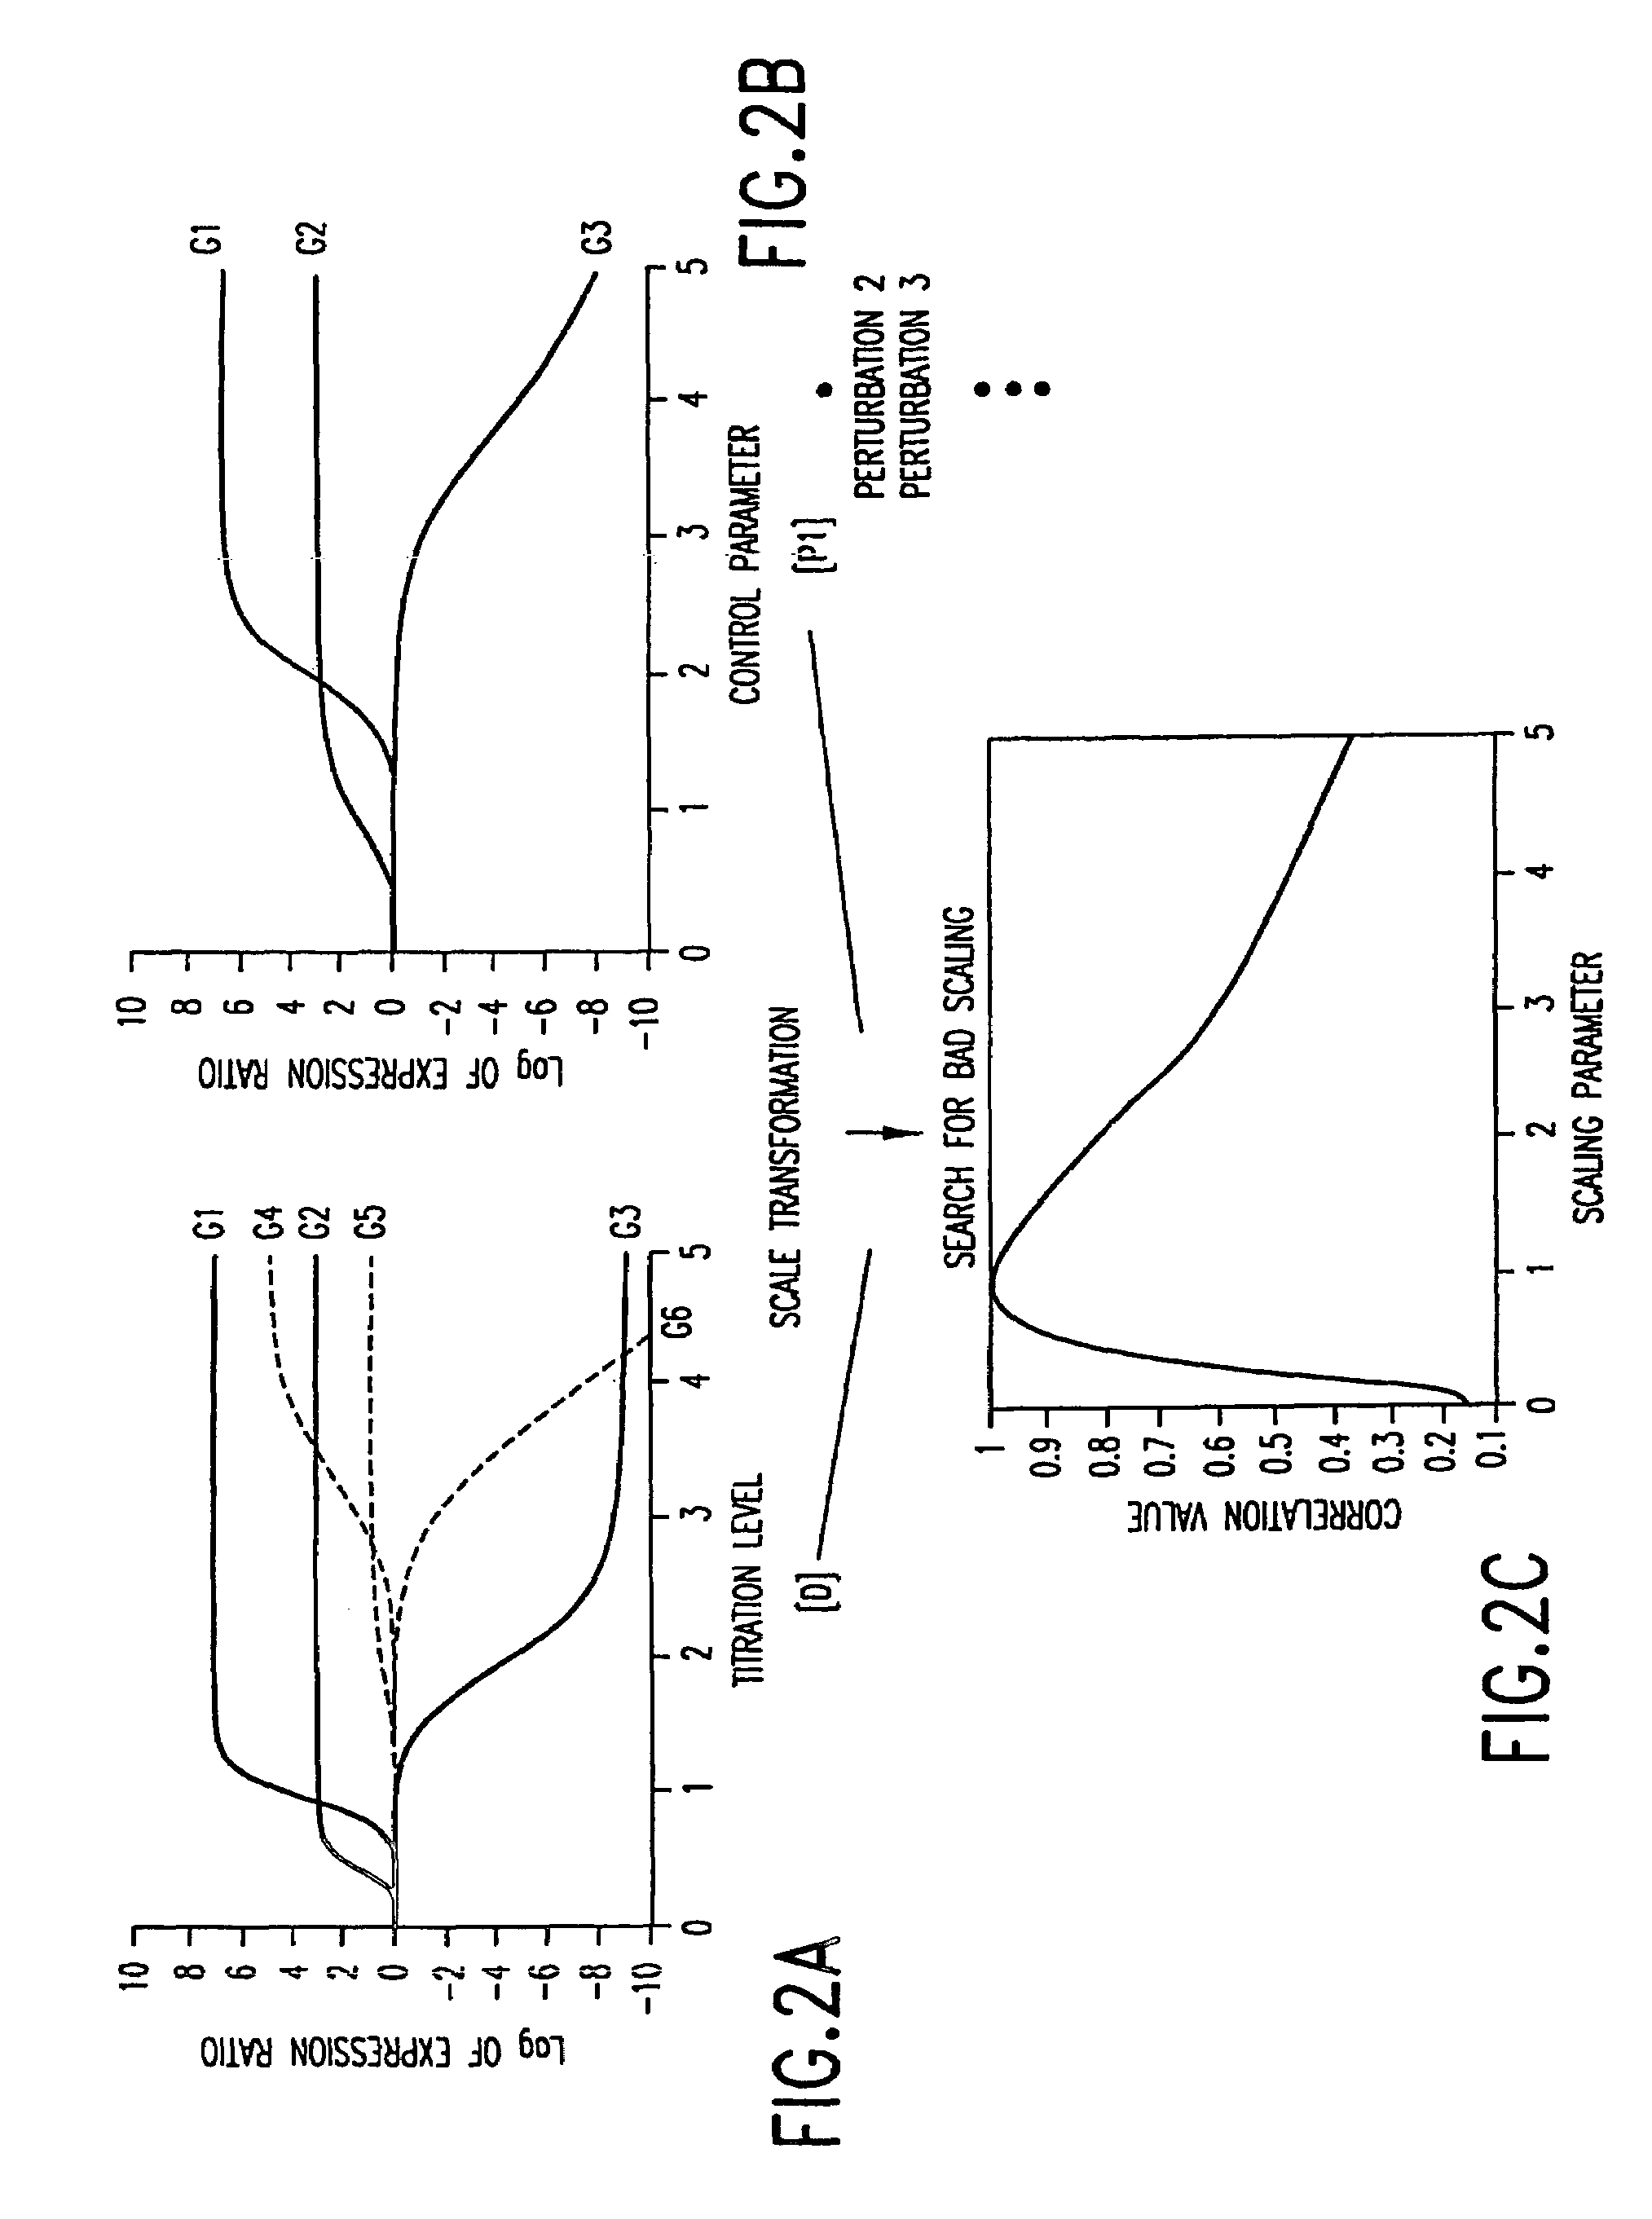 Methods for determining therapeutic index from gene expression profiles